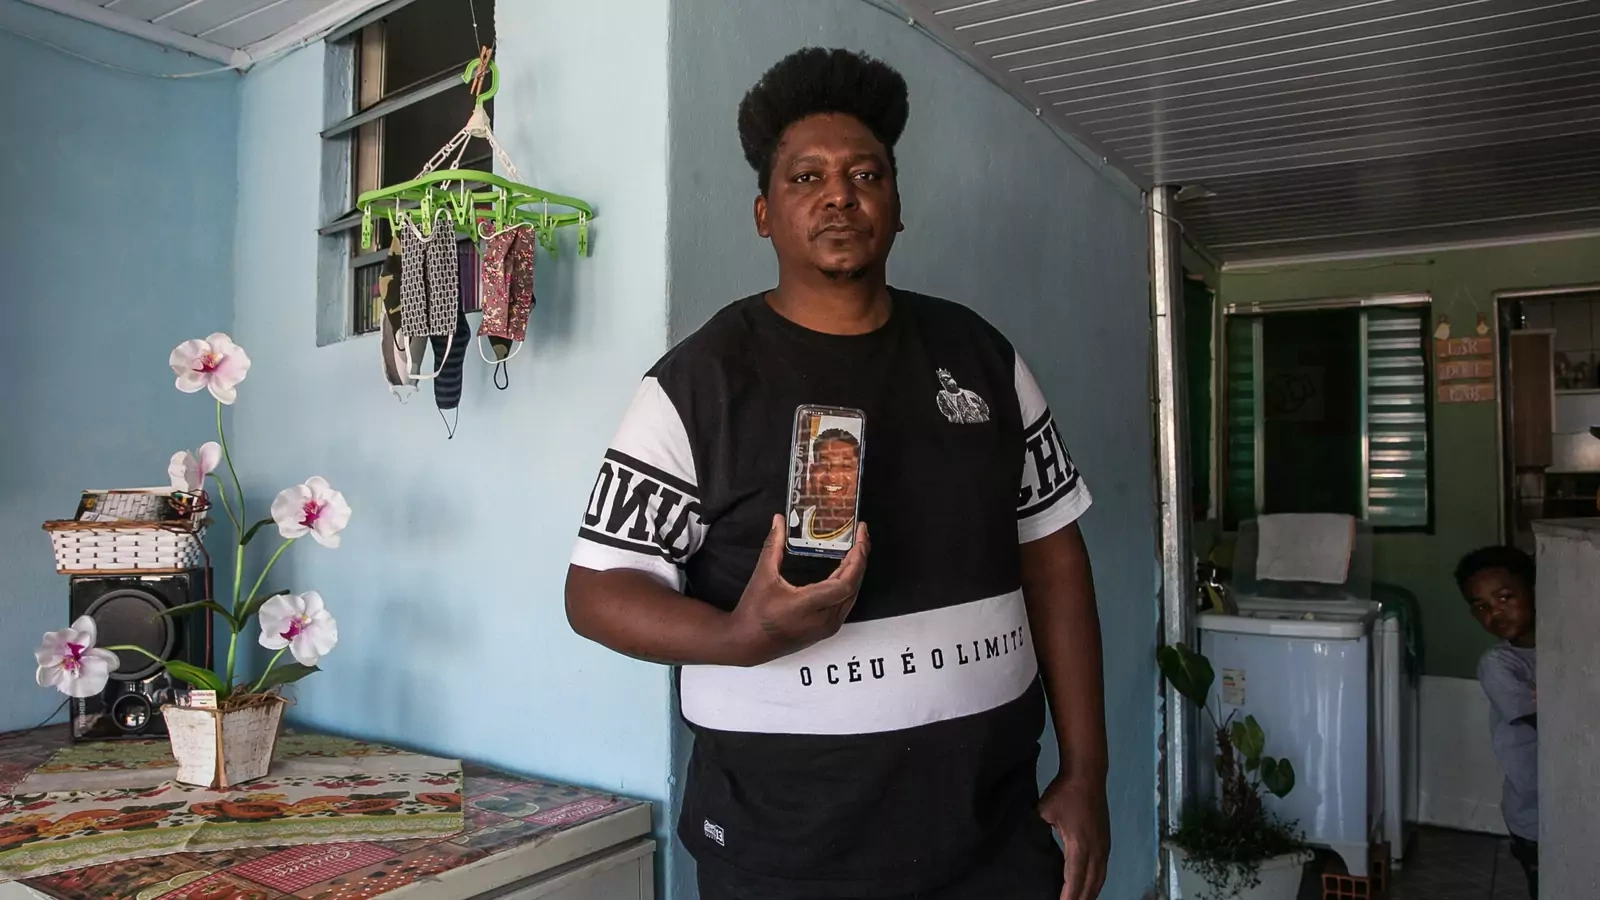 Marcelo Louzada holds a photo of his brother Valdemar Louzada, thirty-eight, in Sao Paulo, Brazil. Valdemar suffered from obesity and died from COVID-19 in May 2020.